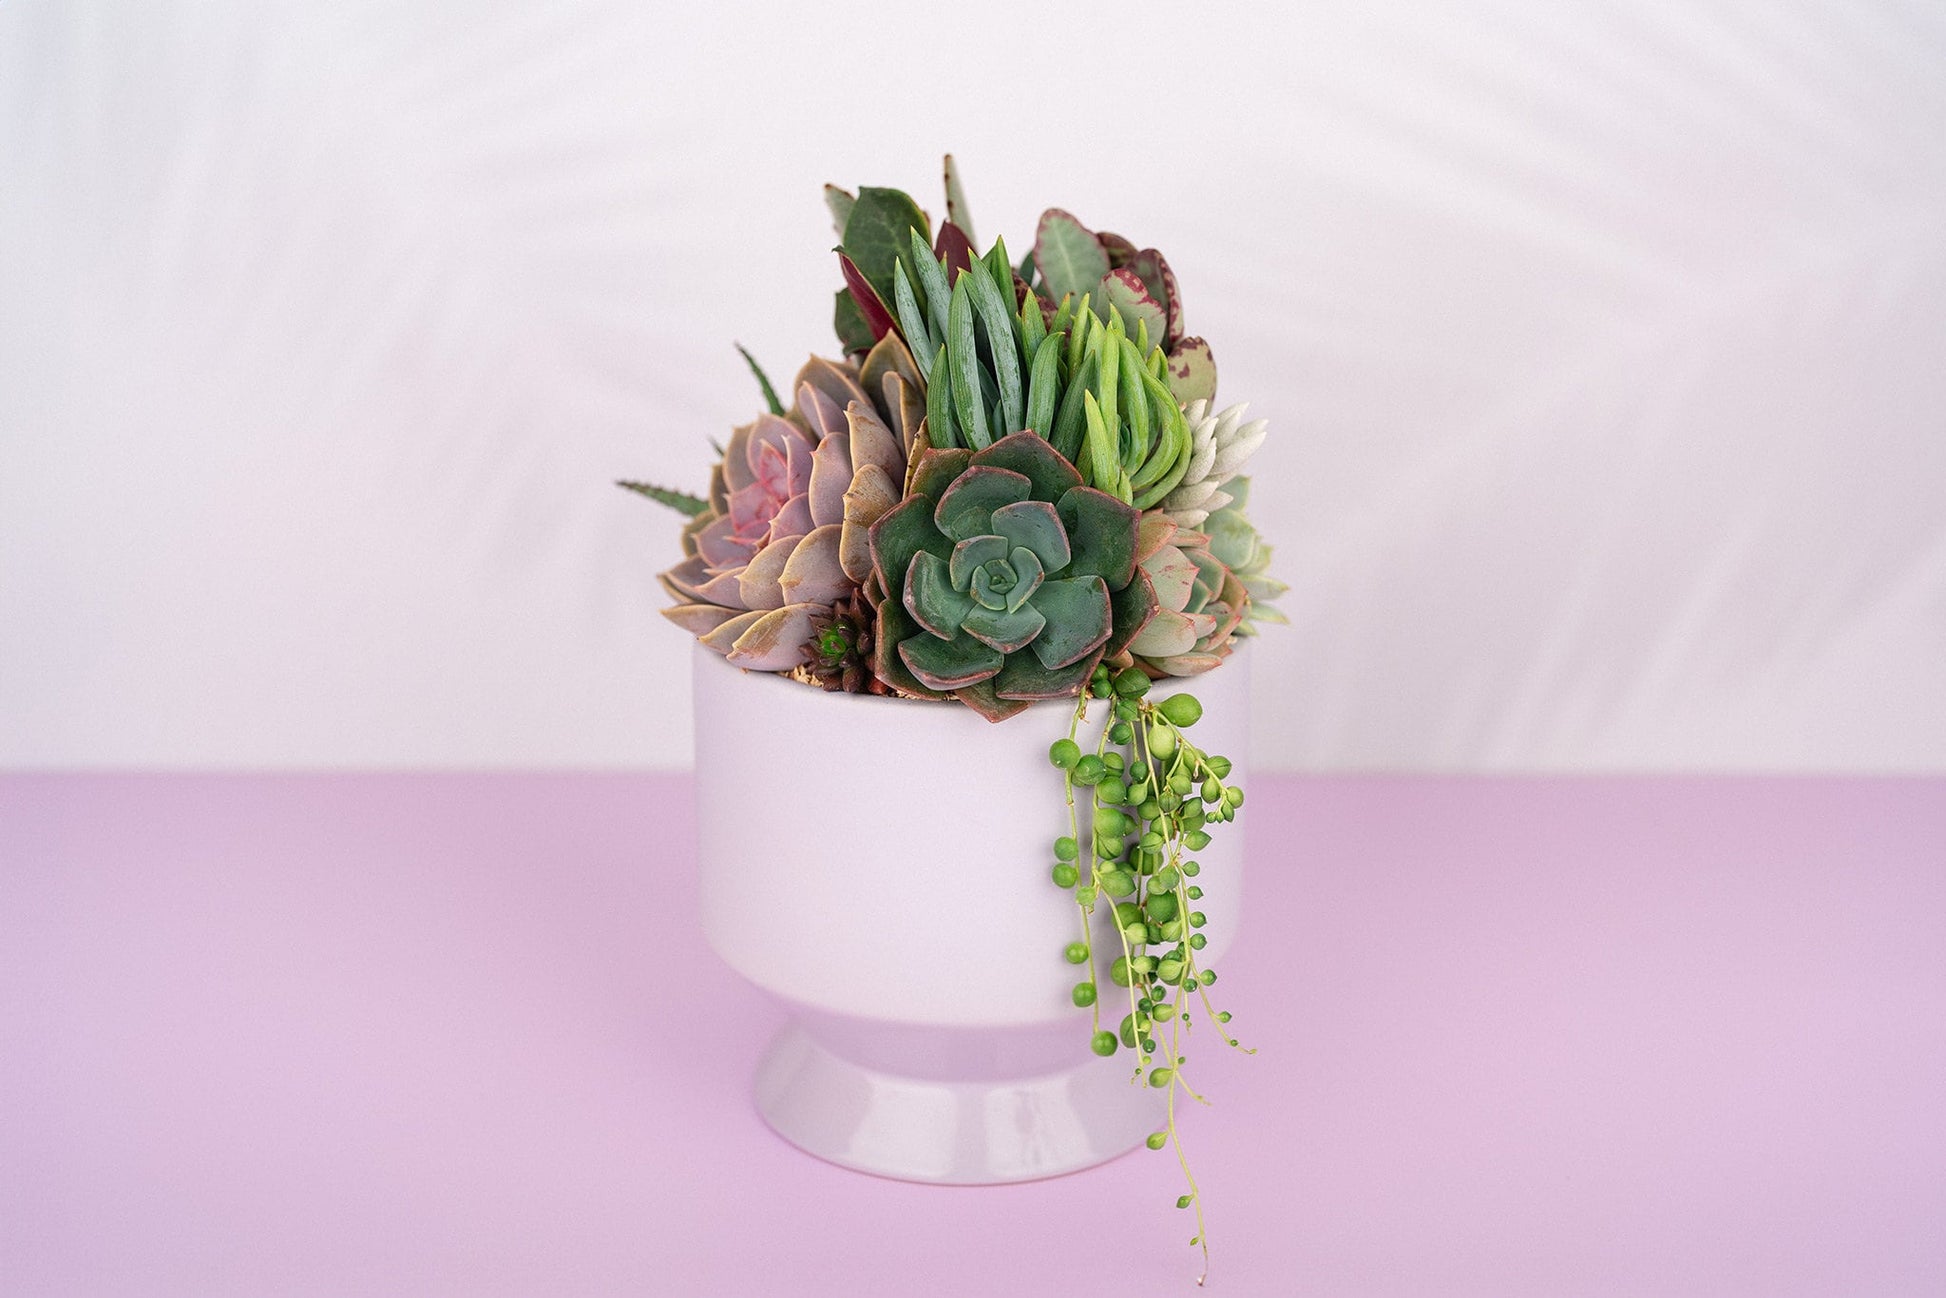 Light Purple (lilac) Footed Succulent Arrangement Planter: Living Succulent Gift, Centerpiece for Weddings and events, Housewarming Gift